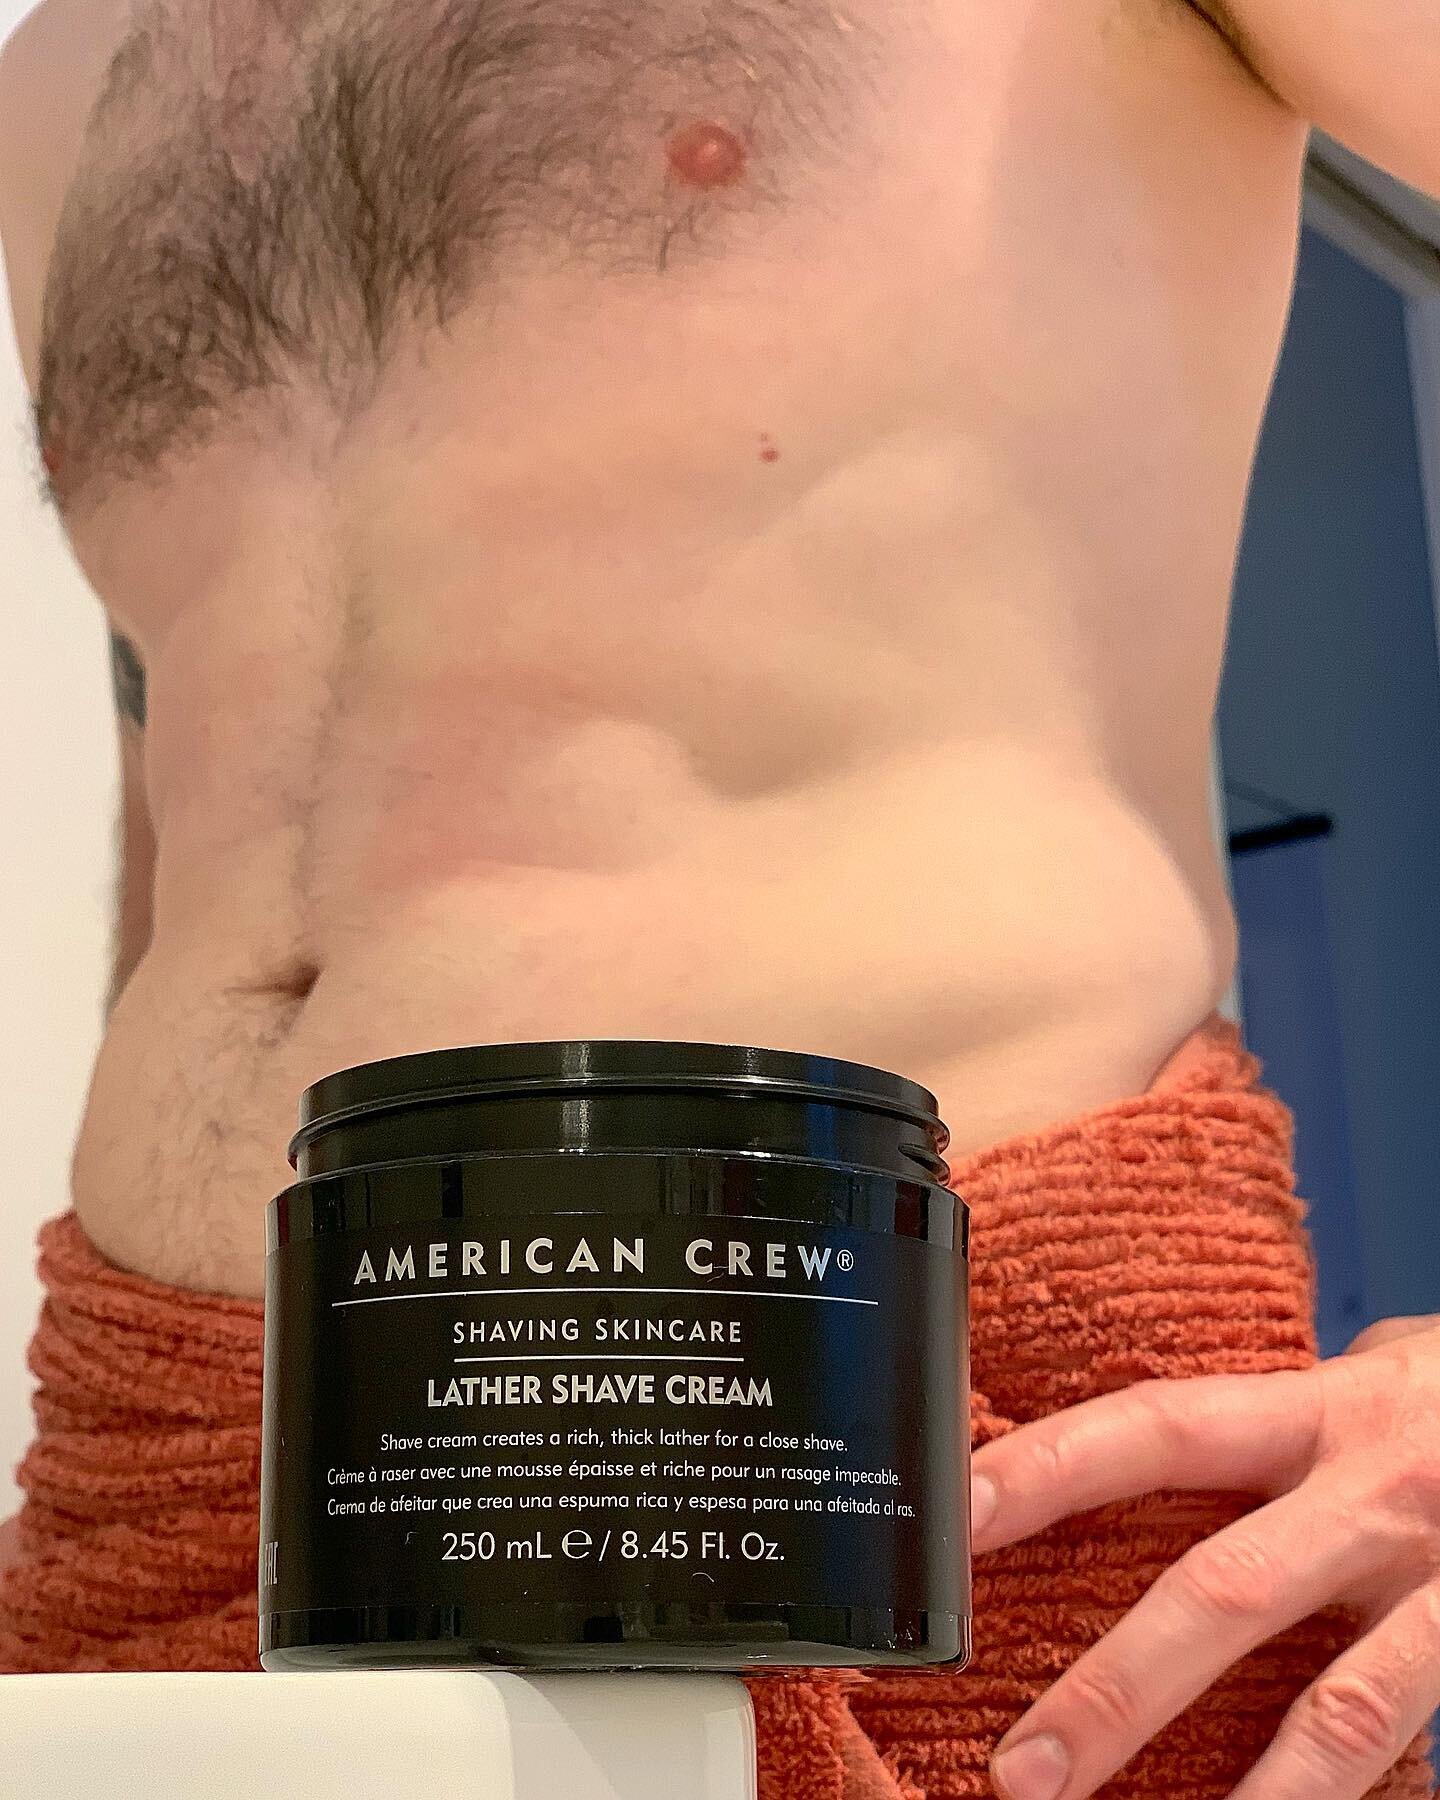 Well it&rsquo;s Monday morning and time for clean up from the weekend. 
I thought I&rsquo;d try this new Lather Shave Cream from @americancrewoz
Formulated with hydrating ingredients for a rich, foamy lather that both softens and lifts facial hair fo